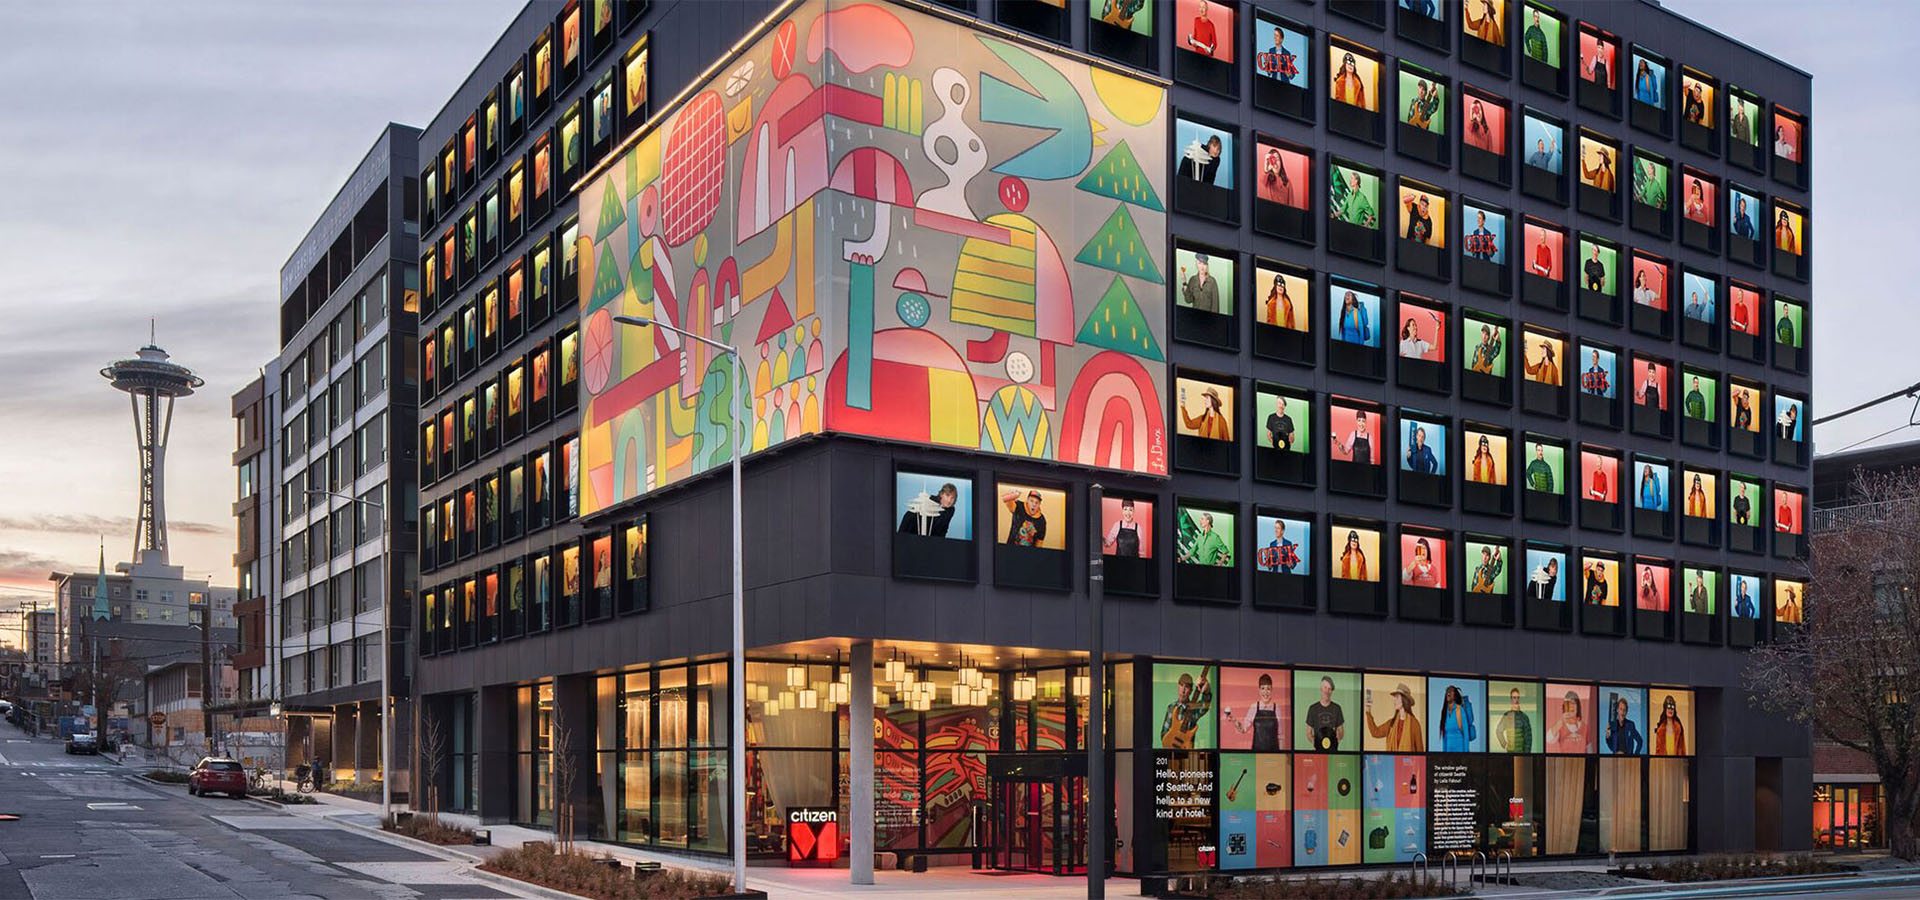 citizenM exterior at dusk